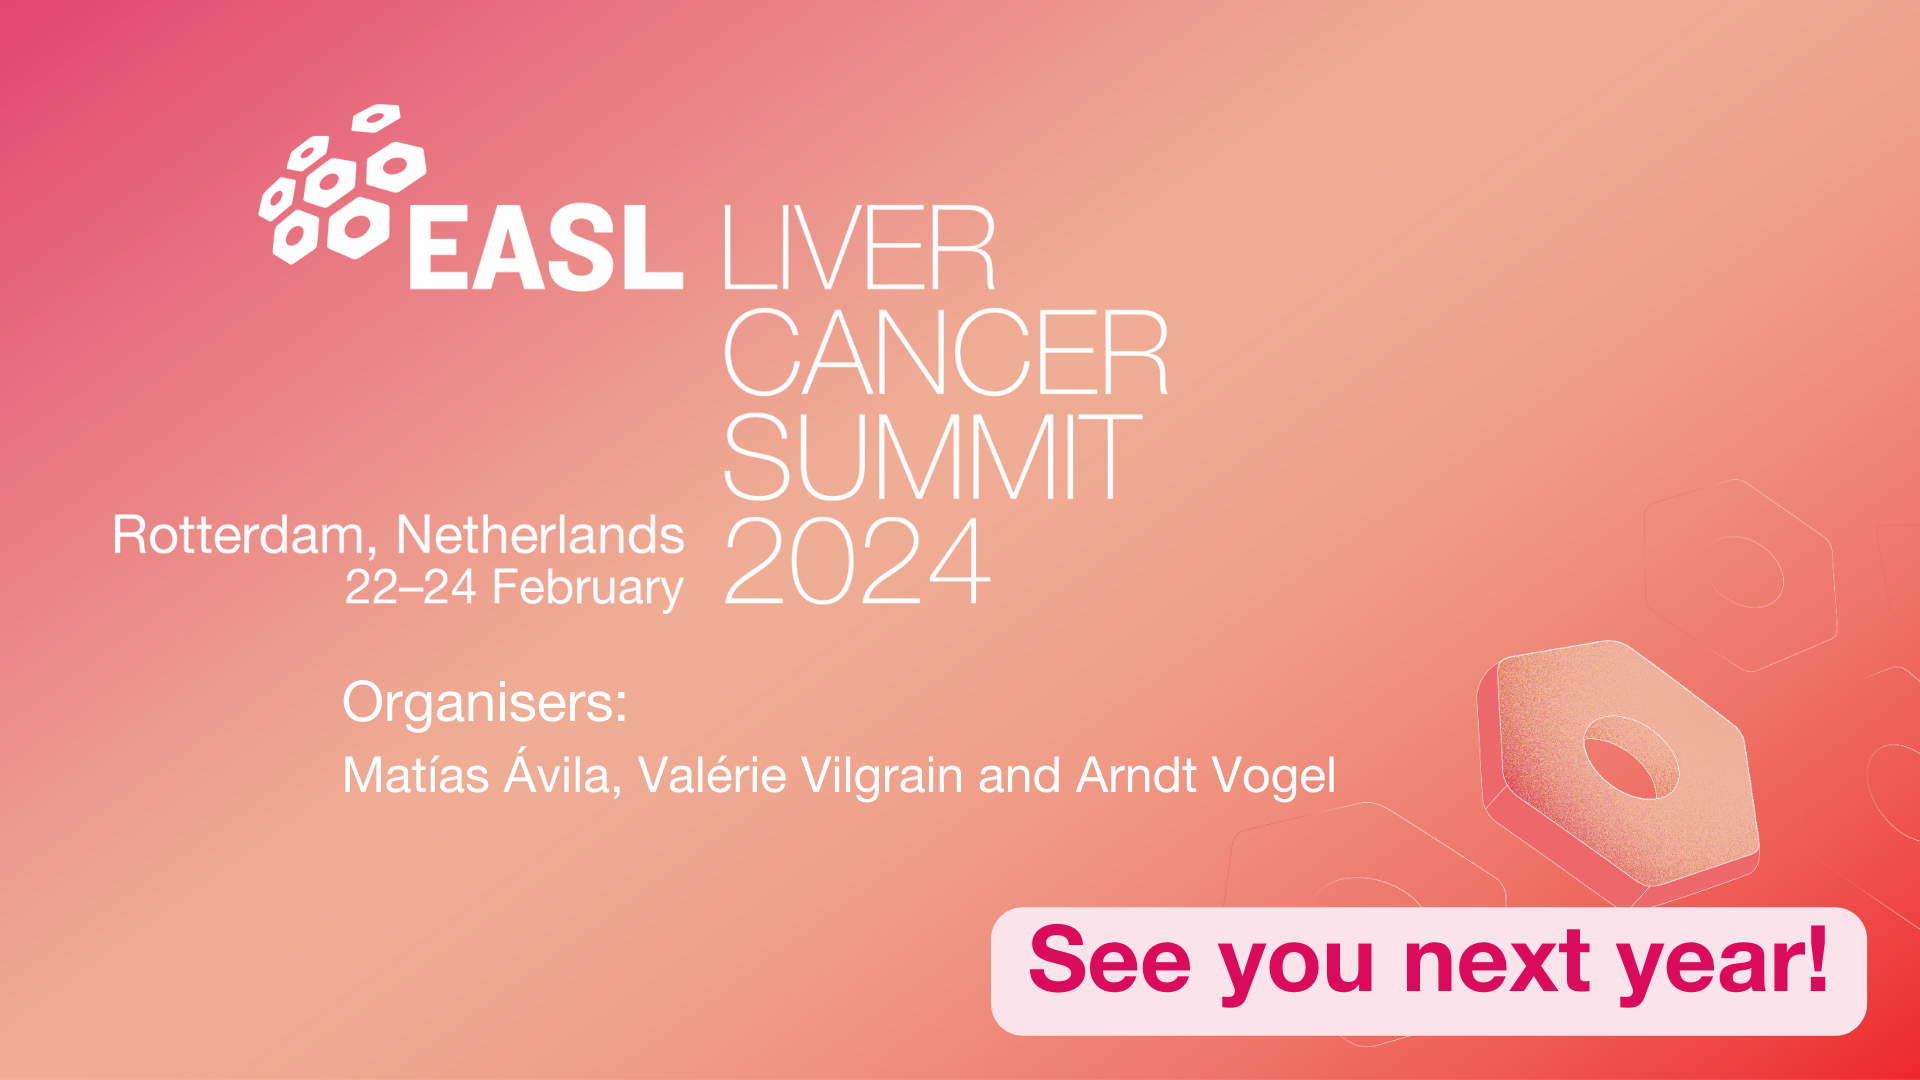 European Association for the Study of the Liver Cancer Summit 2024